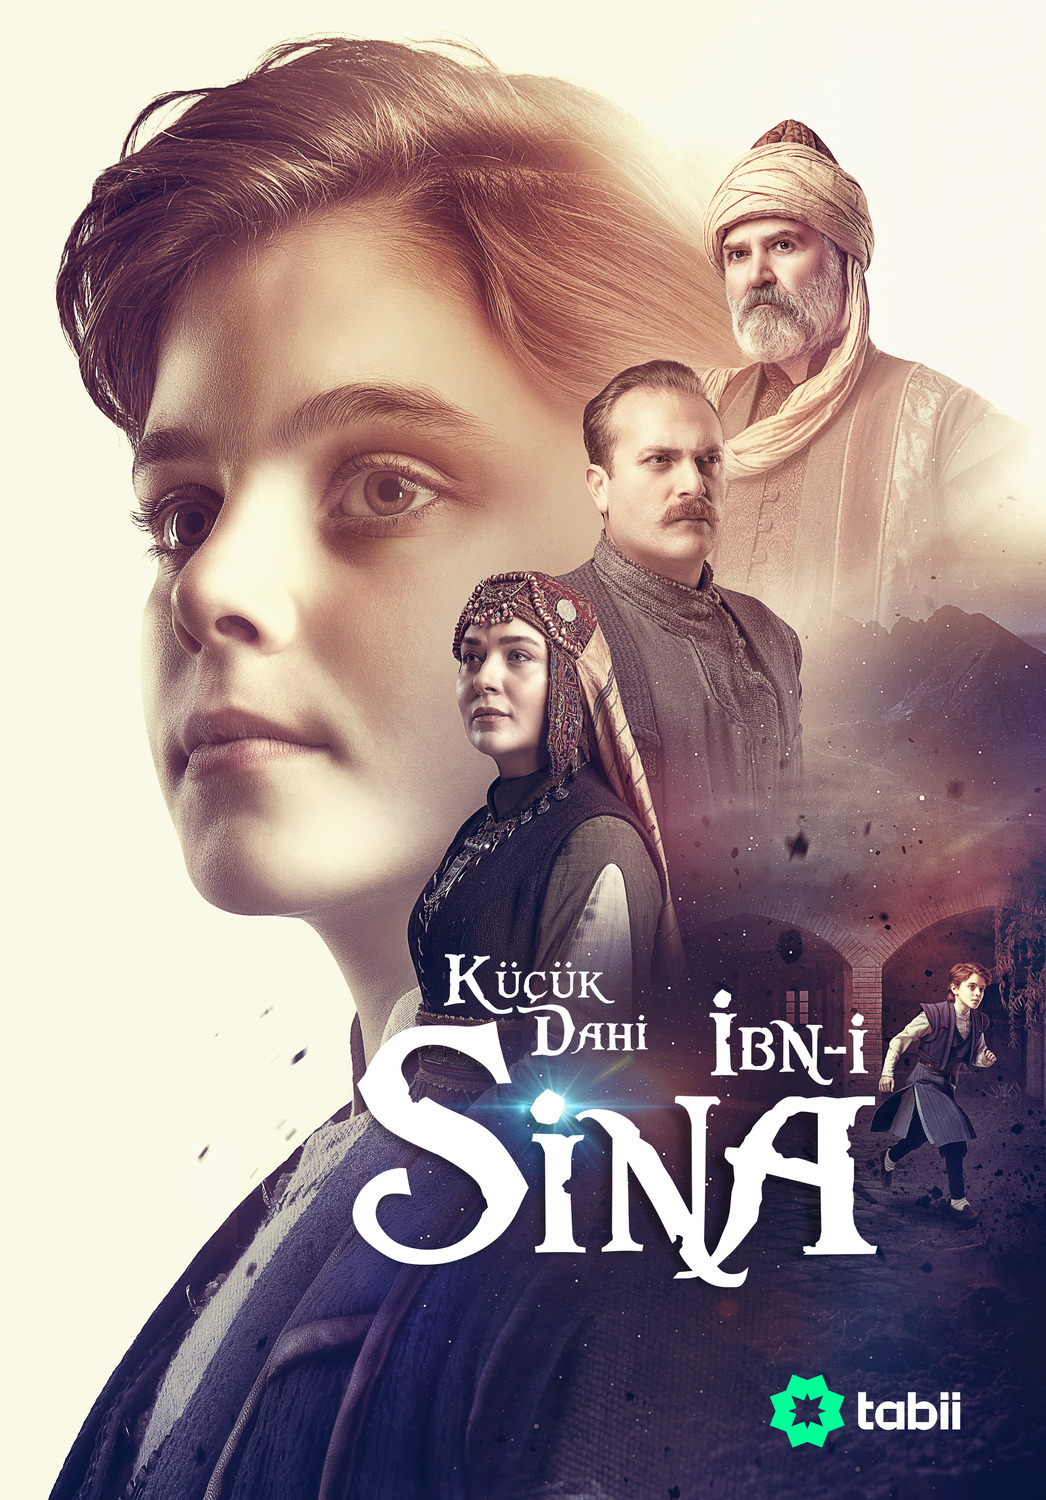 Extra Large TV Poster Image for Ibn-I Sina (#1 of 7)